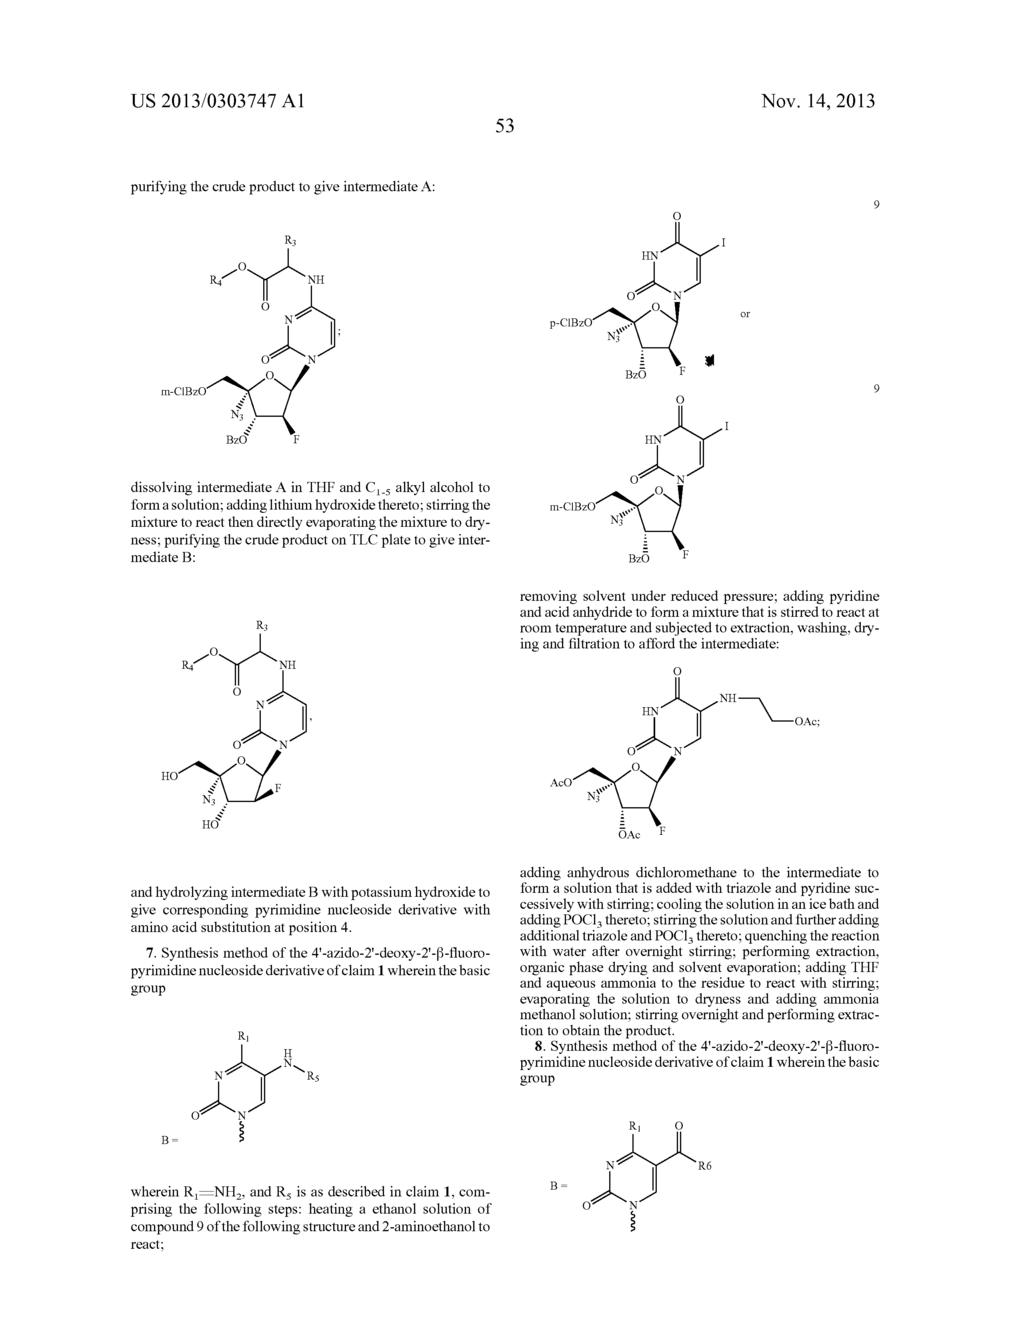 PYRIMIDINE NUCLEOSIDE DERIVATIVES, SYNTHESIS METHODS AND USES THEREOF FOR     PREPARING ANTI-TUMOR AND ANTI-VIRUS MEDICAMENTS - diagram, schematic, and image 54